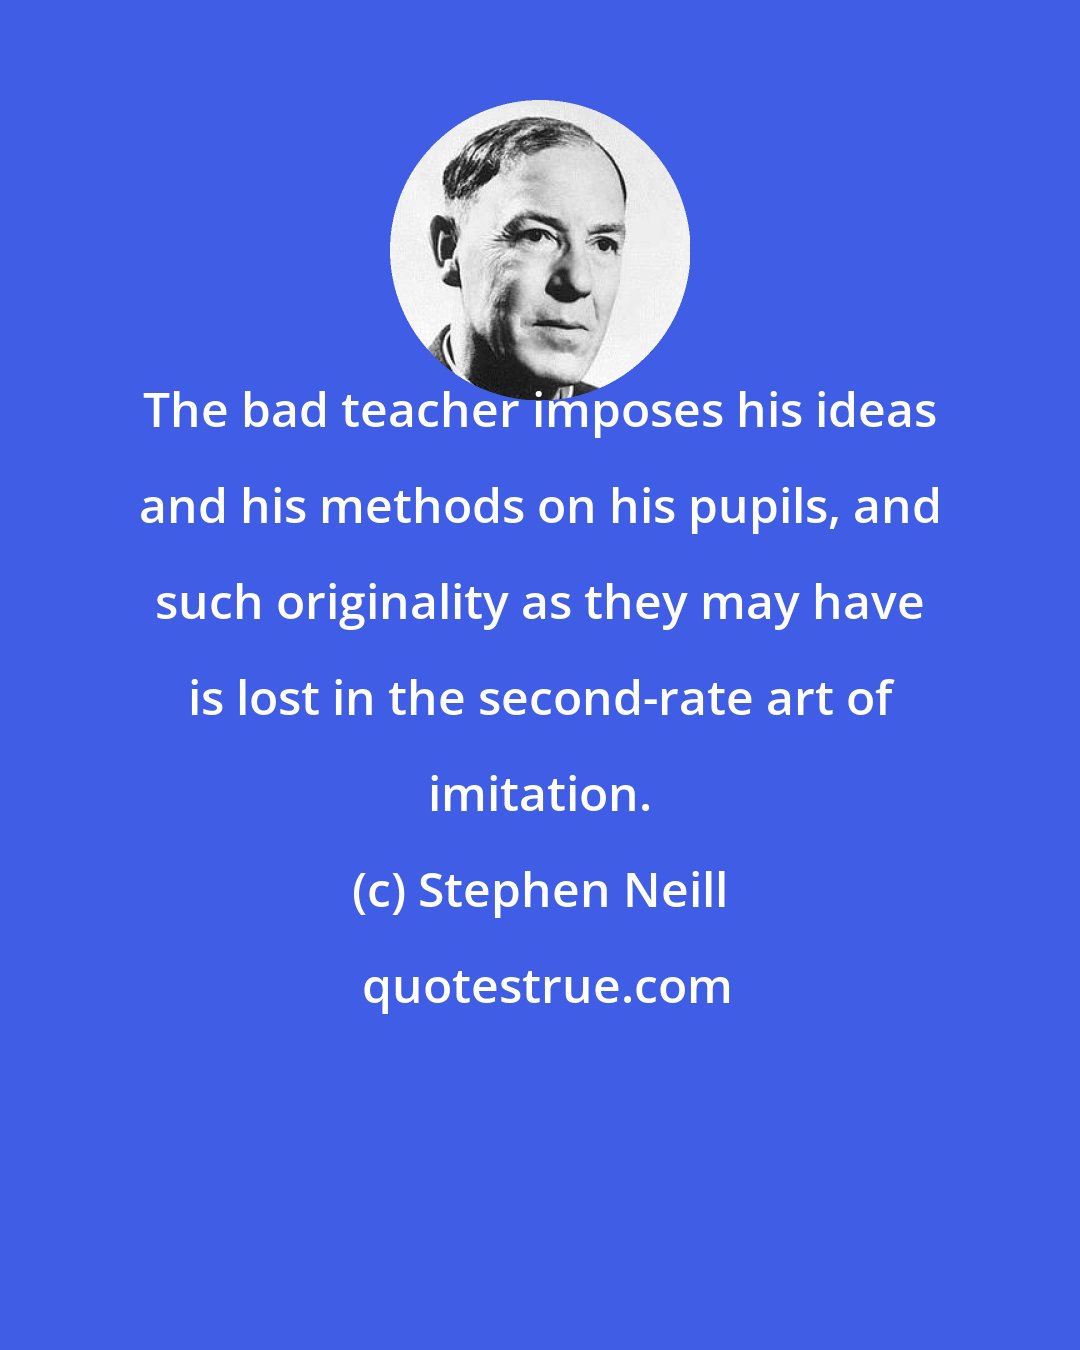 Stephen Neill: The bad teacher imposes his ideas and his methods on his pupils, and such originality as they may have is lost in the second-rate art of imitation.